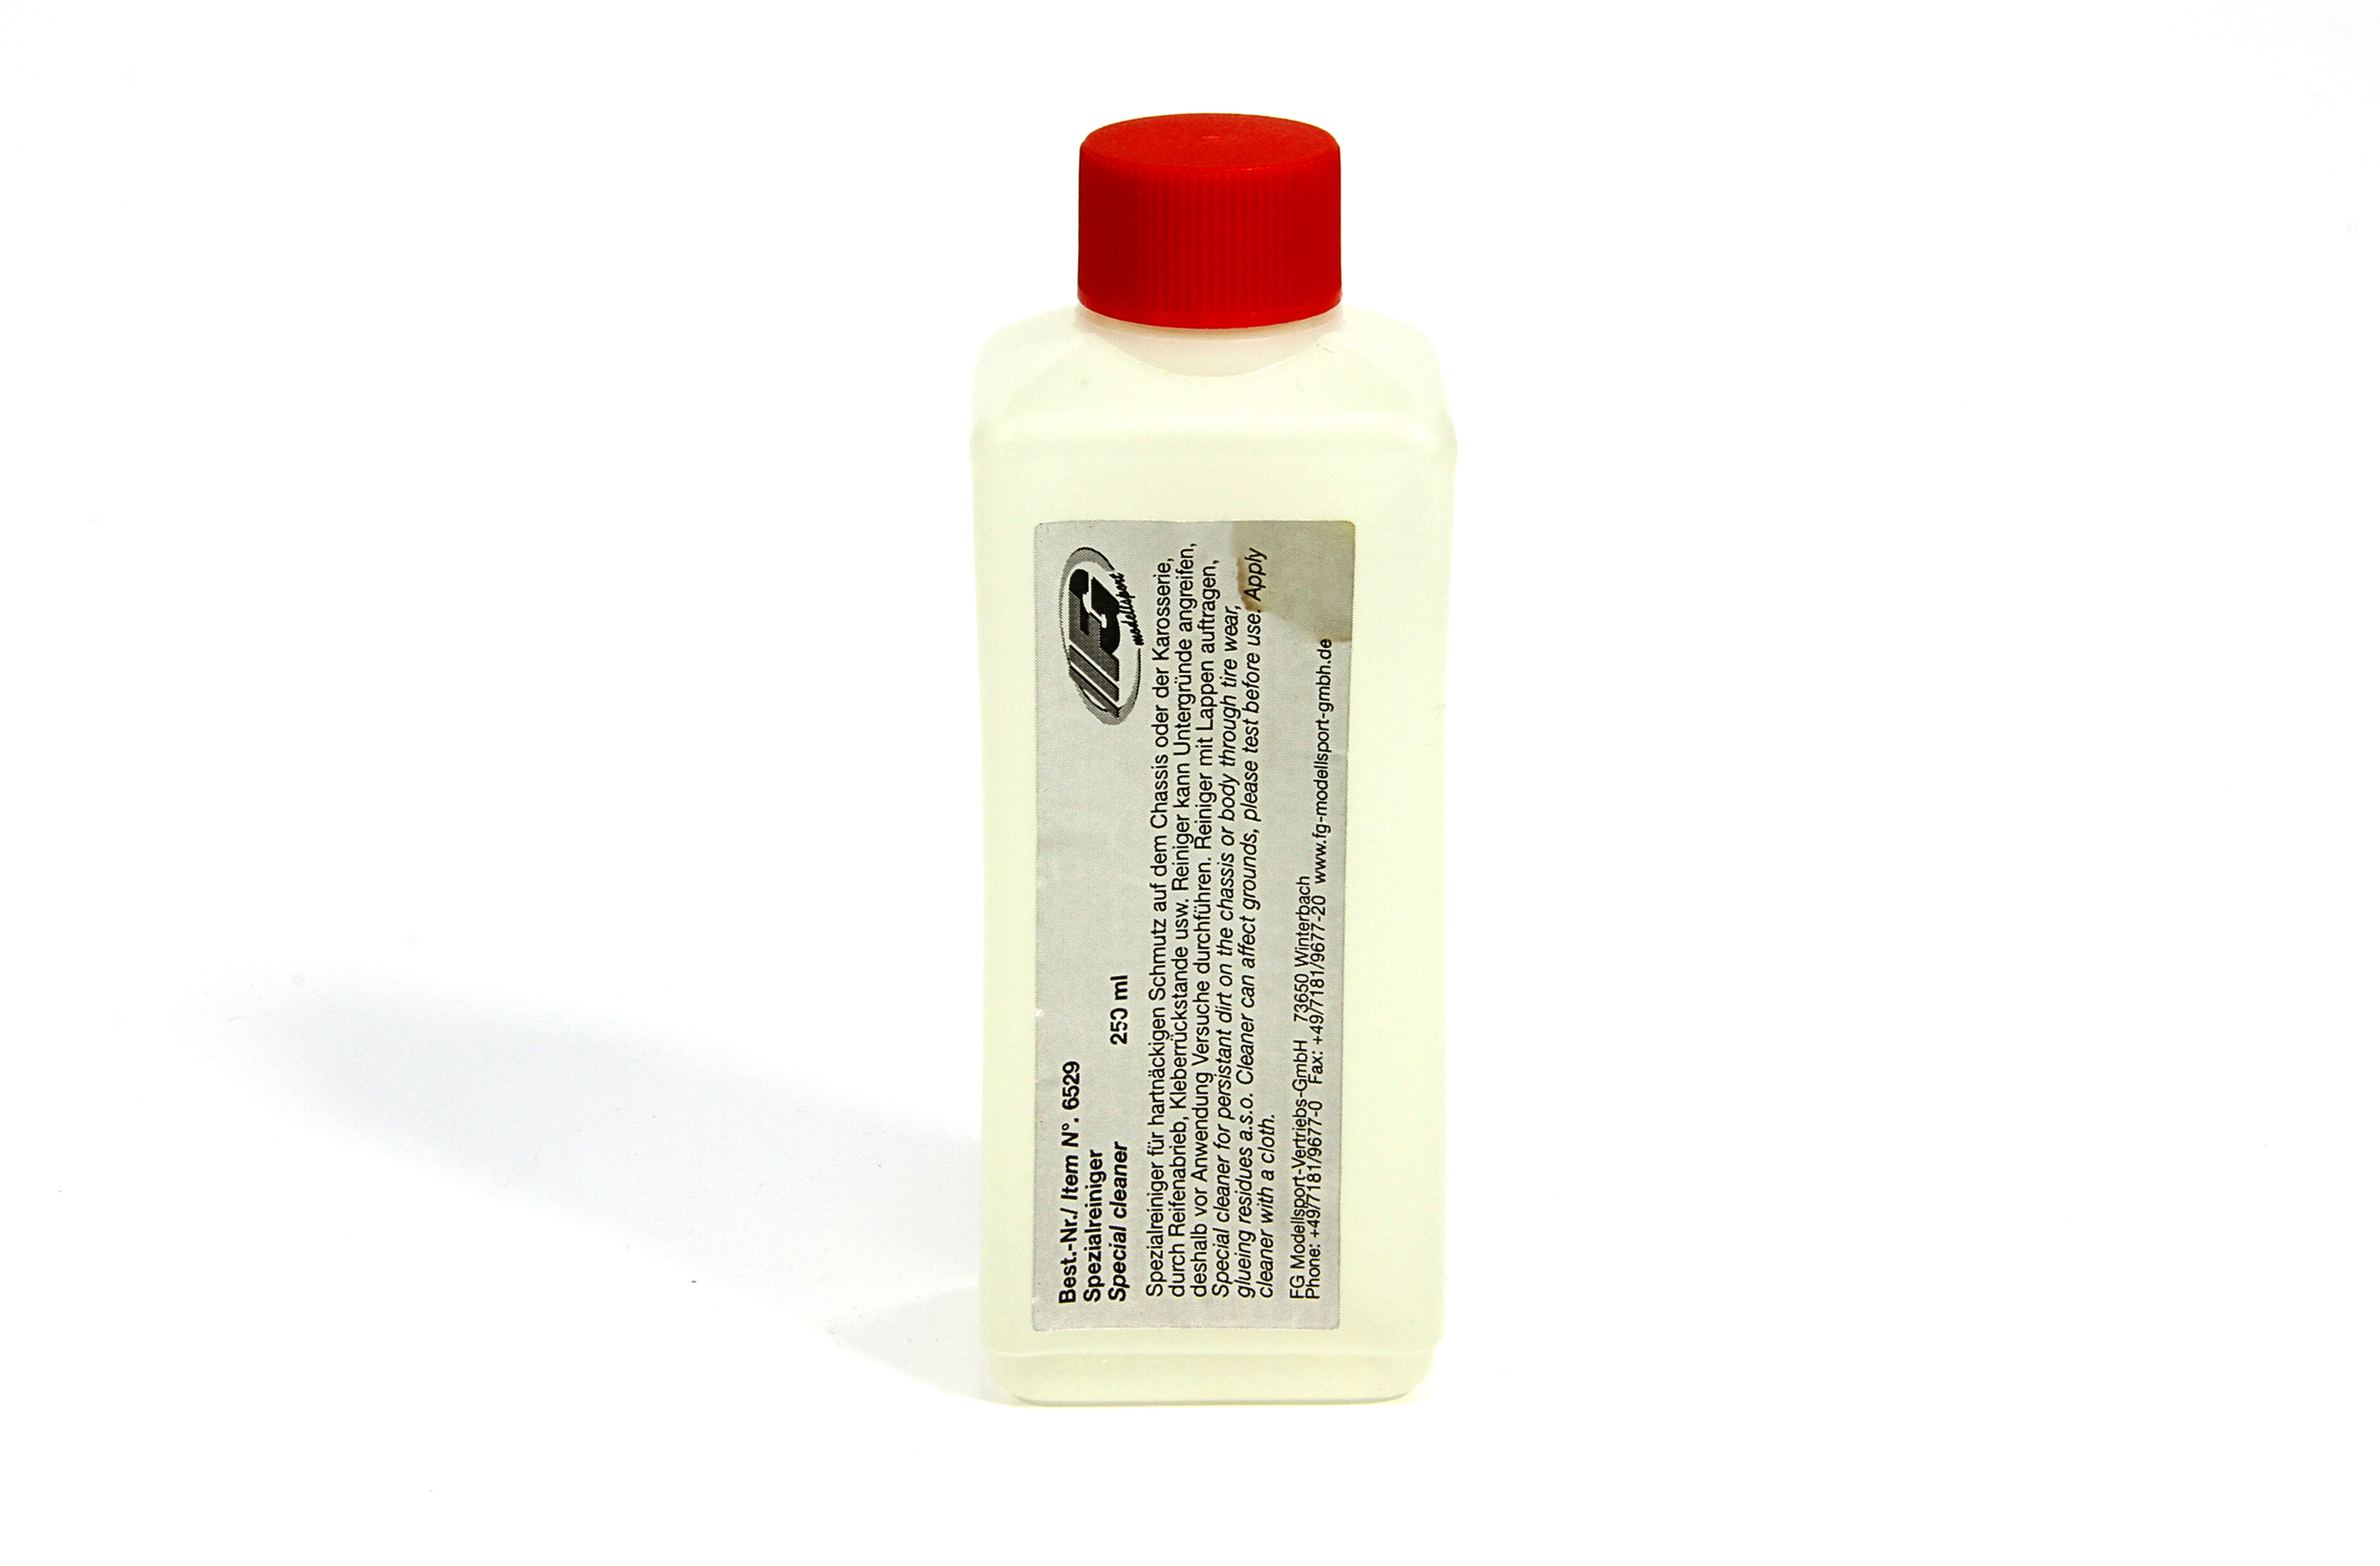 6529 FG Special cleaner 250ml - 1pce.